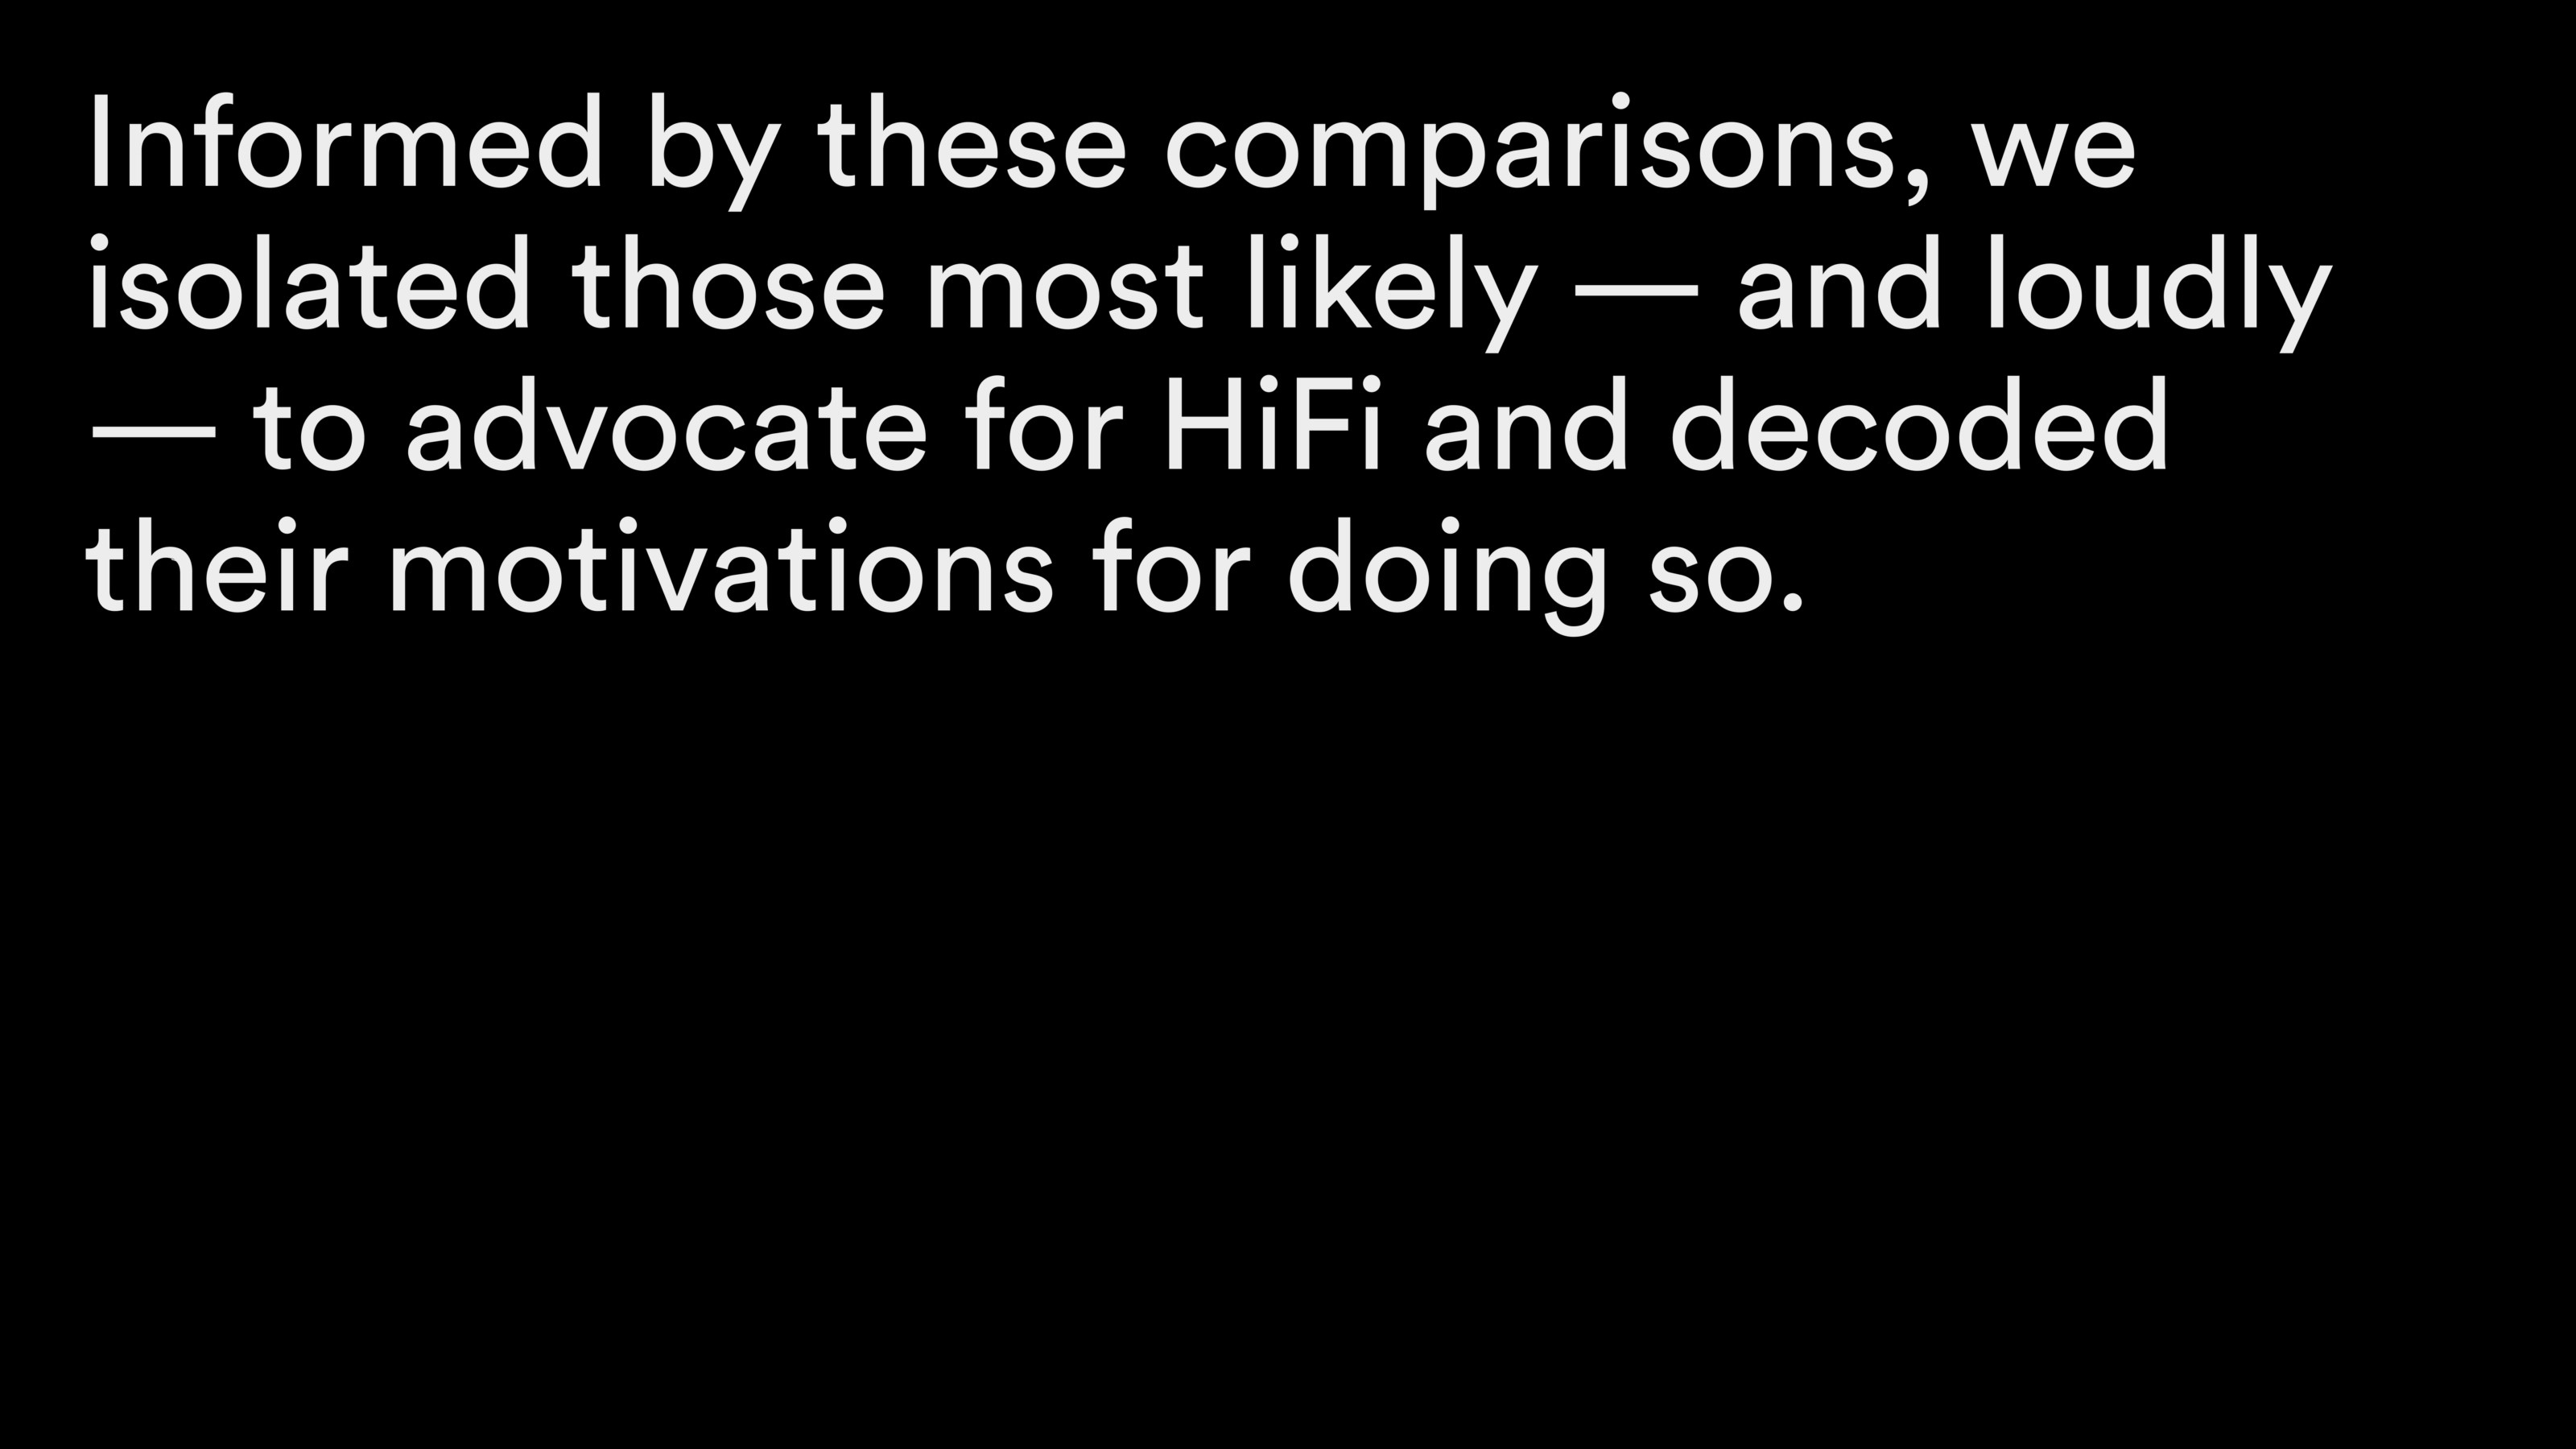 Informed by these comparisons we isolated those most likely—and loudly—to advocate for HiFi and decoded their motivations for doing so.